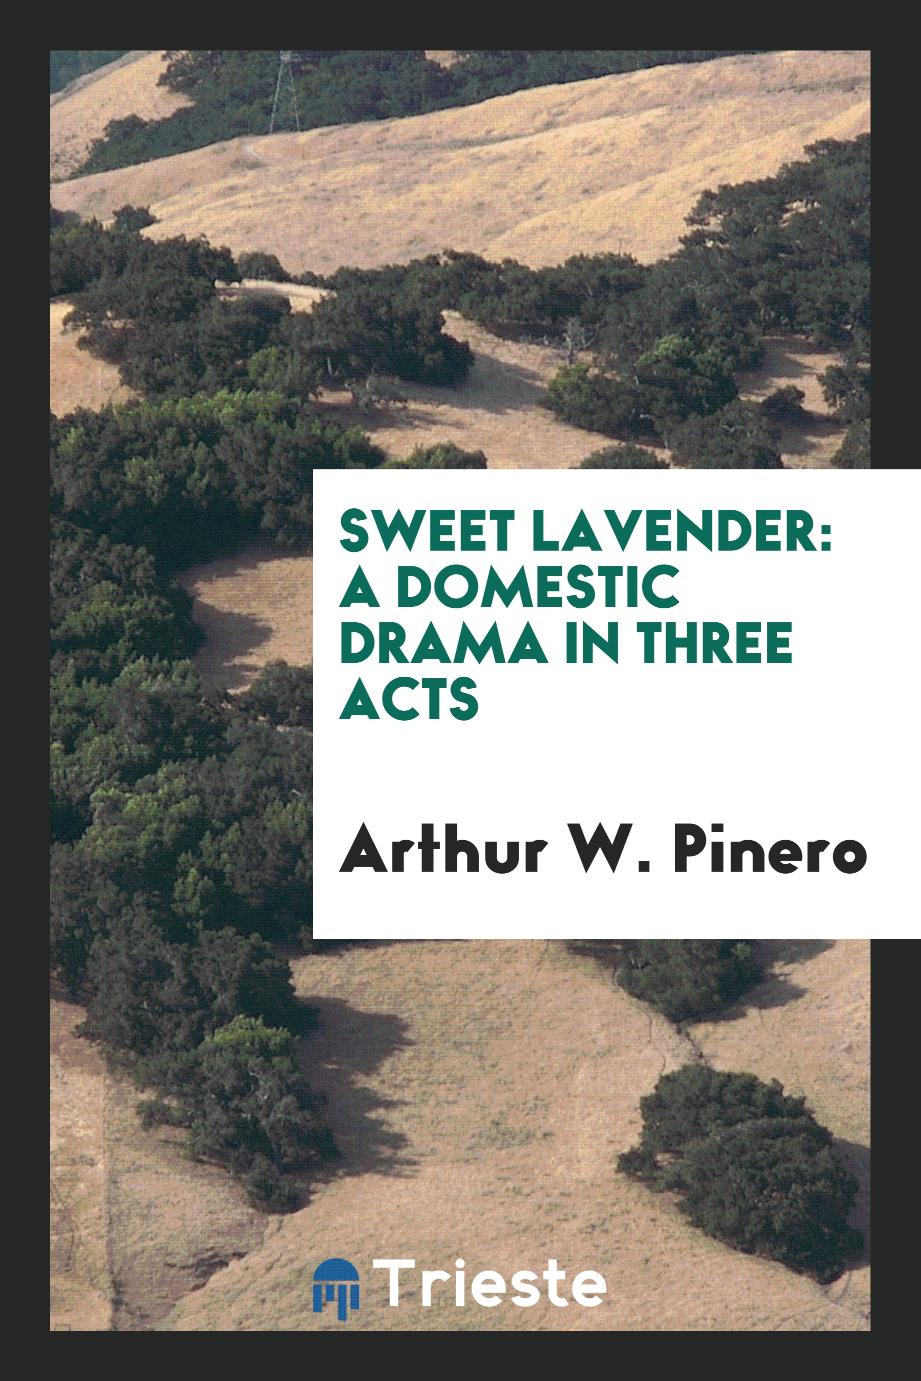 Sweet Lavender: a domestic drama in three acts